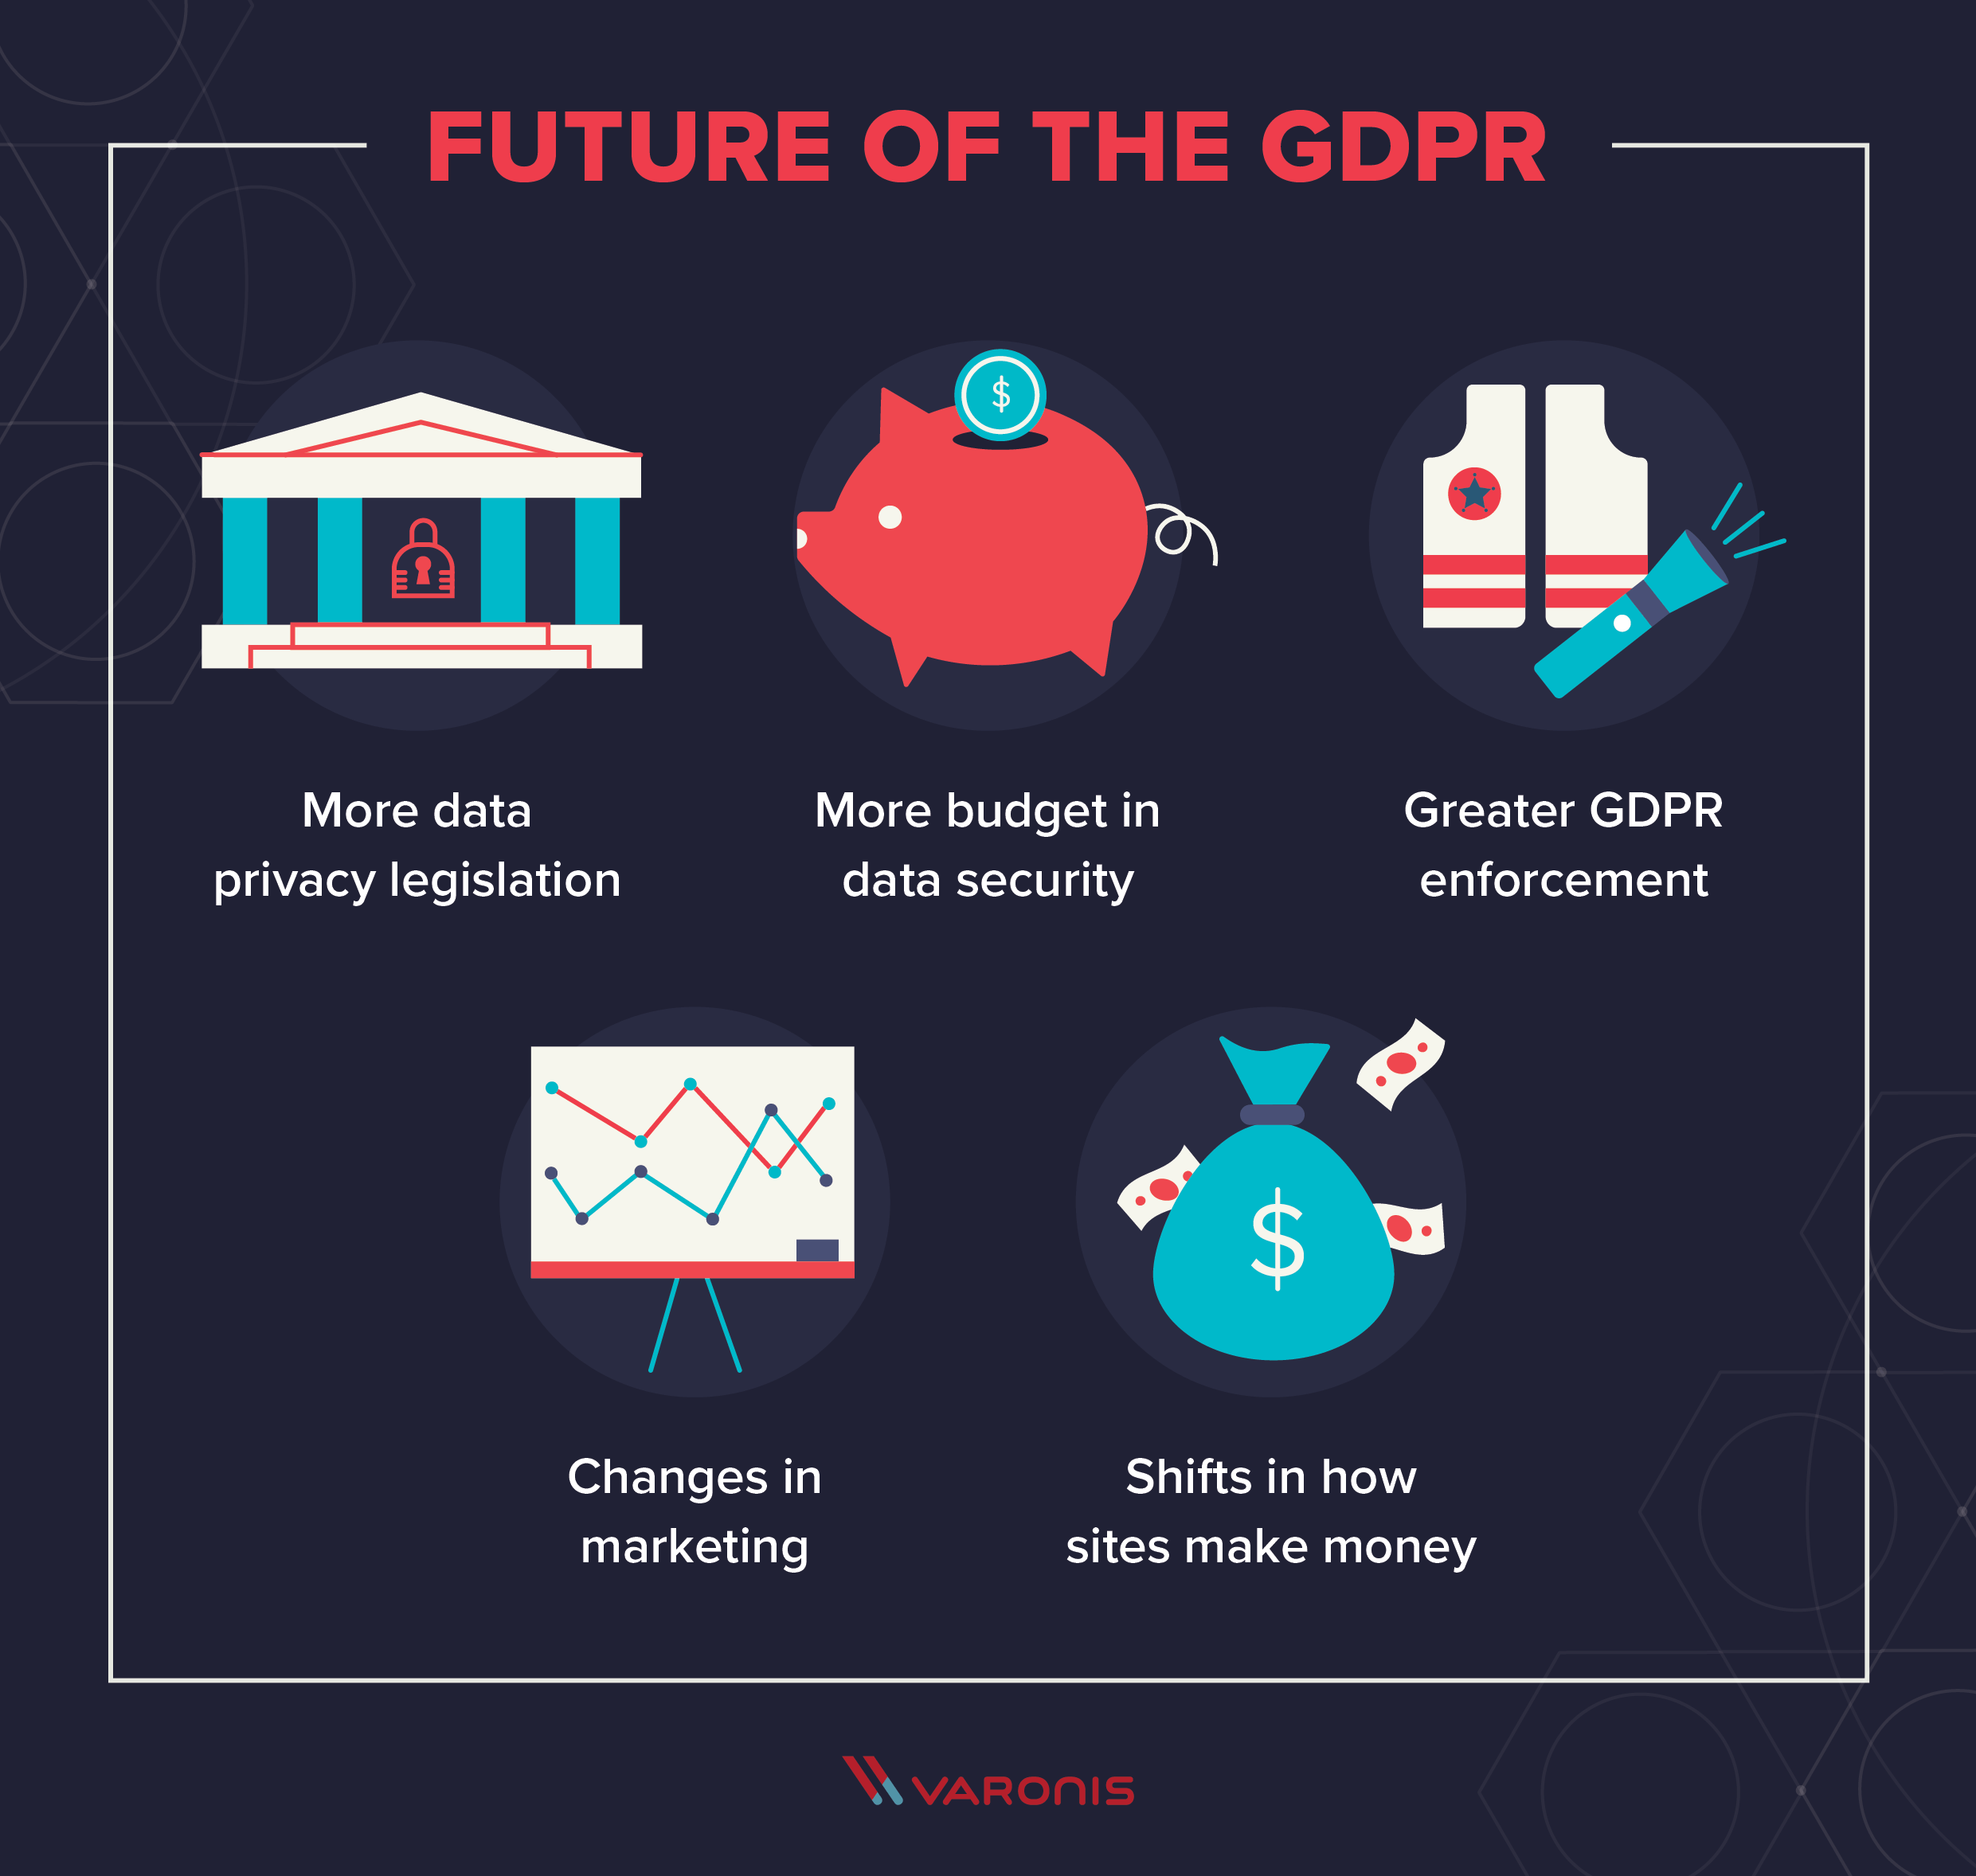 Illustration with text: Title: Future of the GDPR. Copy: More data privacy legislation (capitol building symbol), Greater GDPR enforcement (police vest and flashlight symbol), More budget in data security (a piggy bank symbol), Changes in marketing (a line graph illustration) Shifts in how sites make money (money bag symbol)